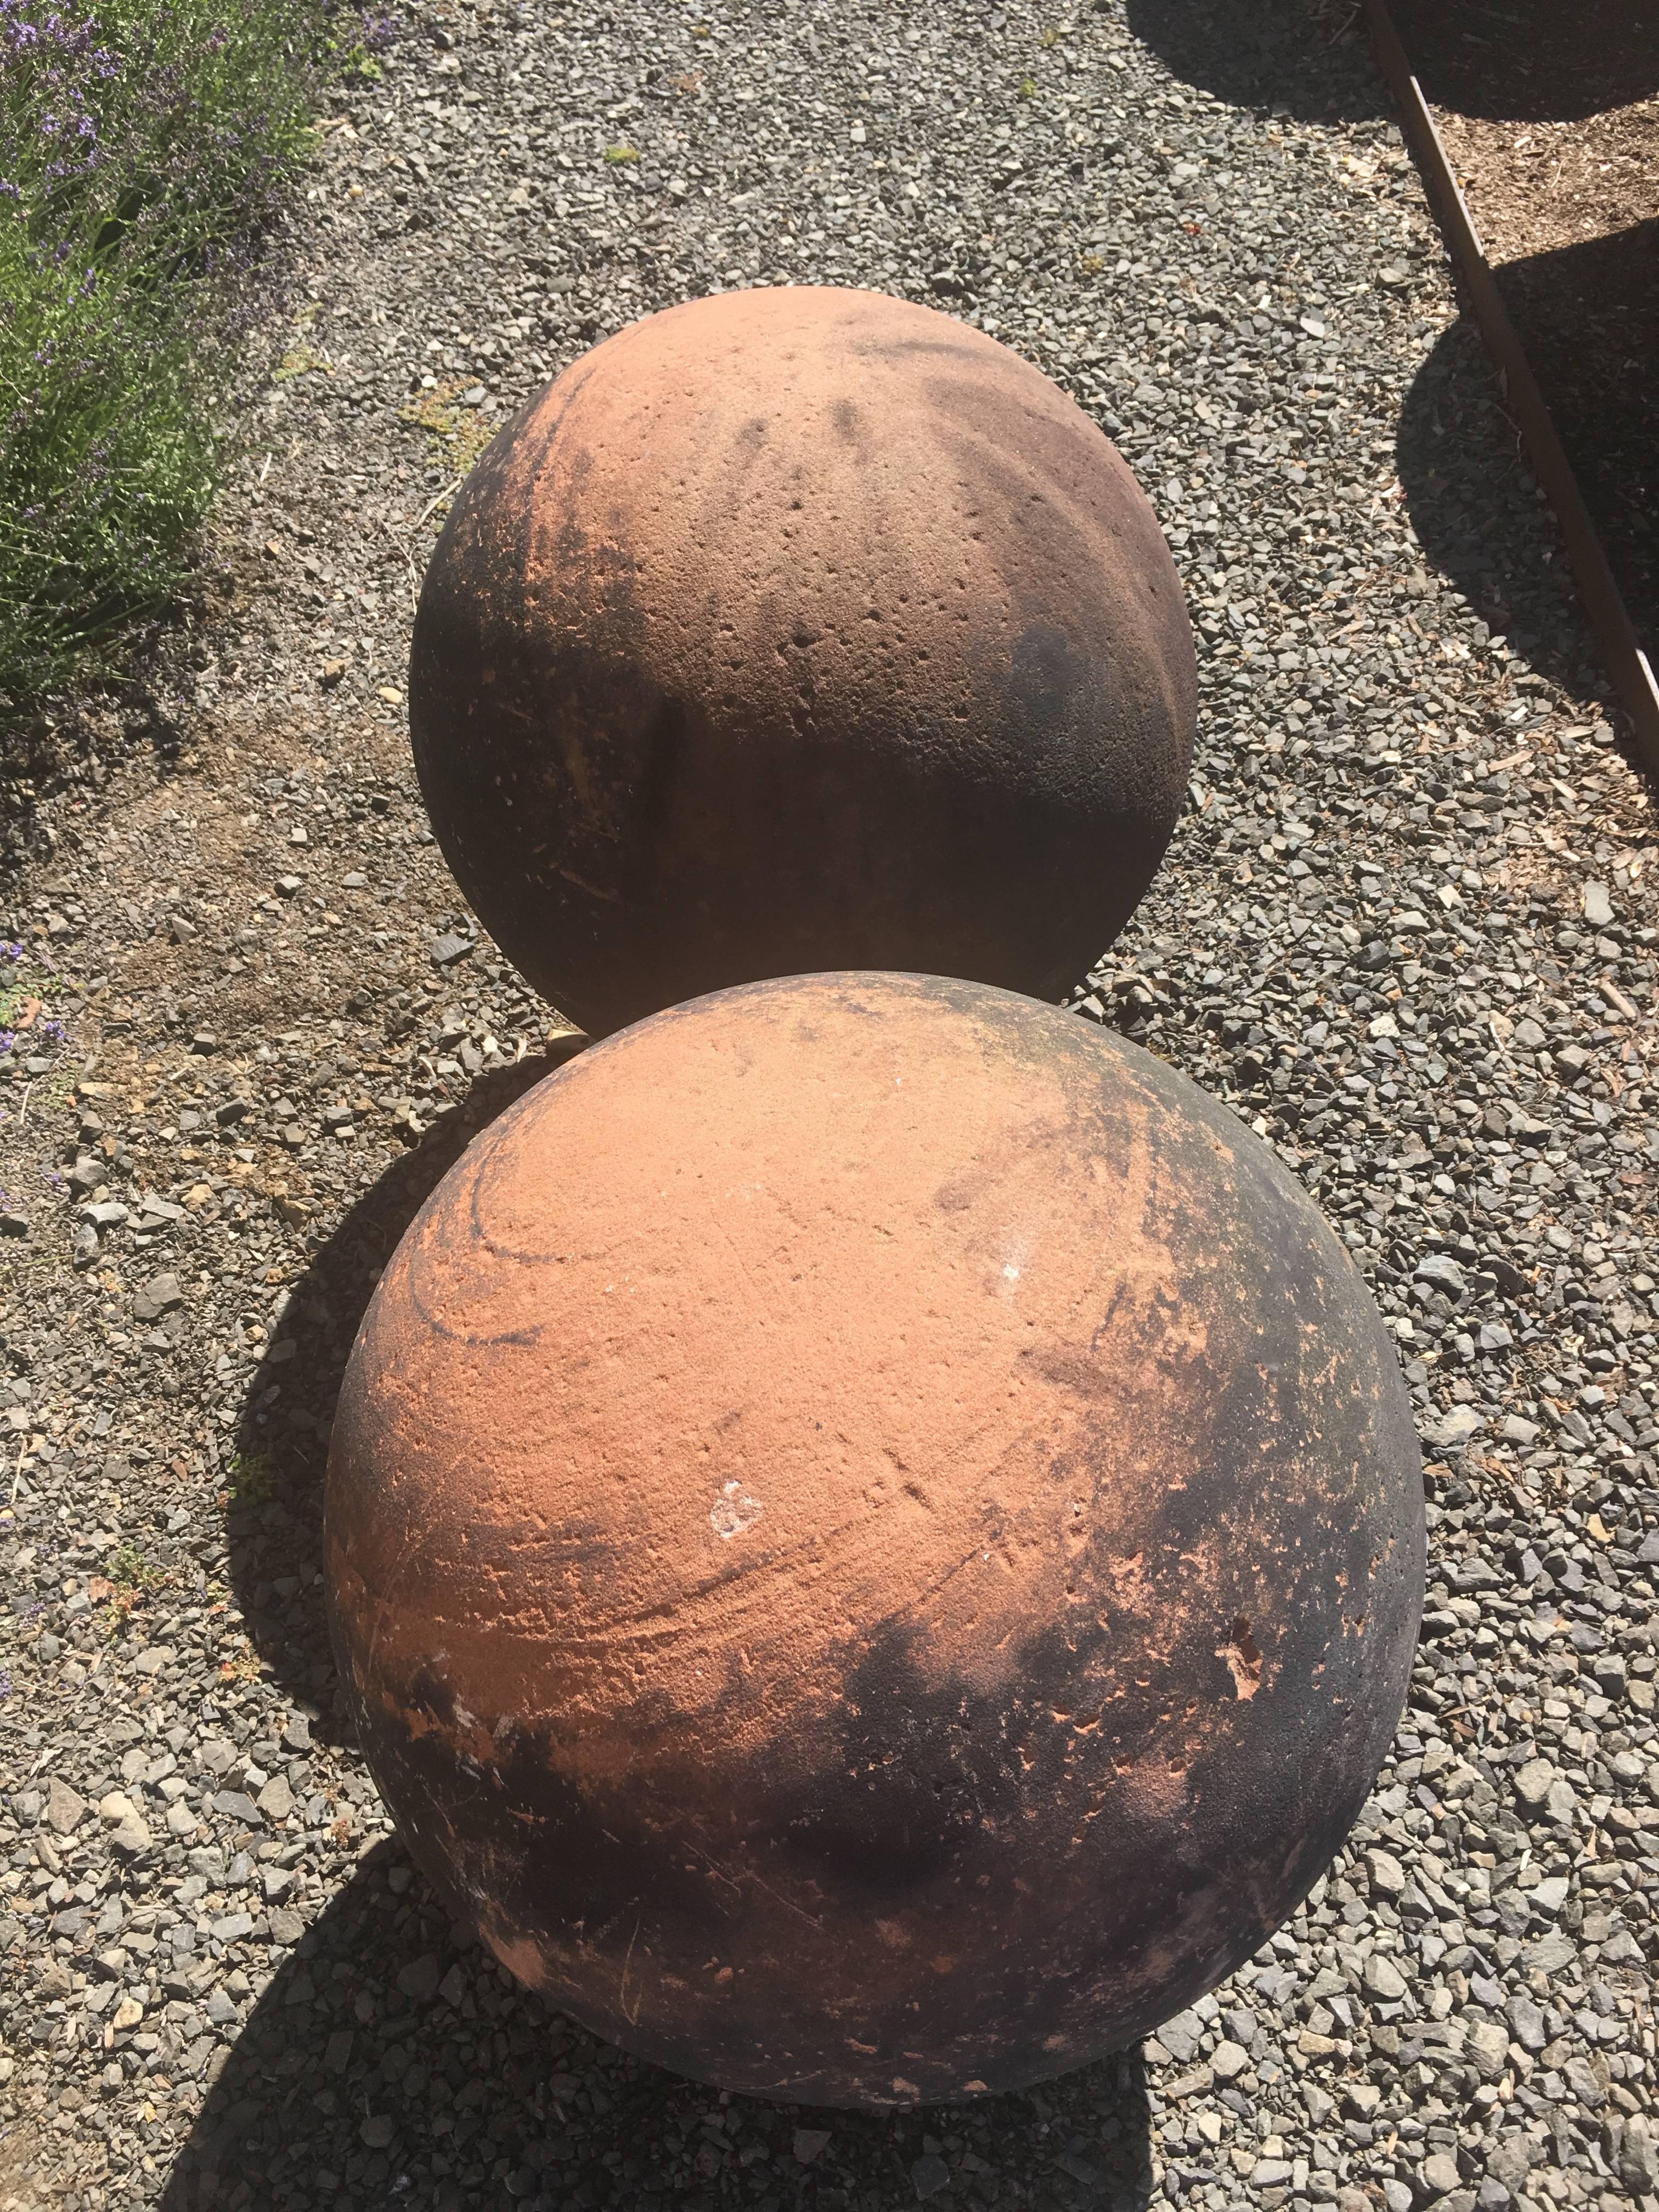 This is a magnificent and rare pair of very large carved red sandstone balls with verdigris bronze feet. Over the years, they have developed an amazing patina that, to our eye, resembles the planet Jupiter, and the combination of blackened coal dust